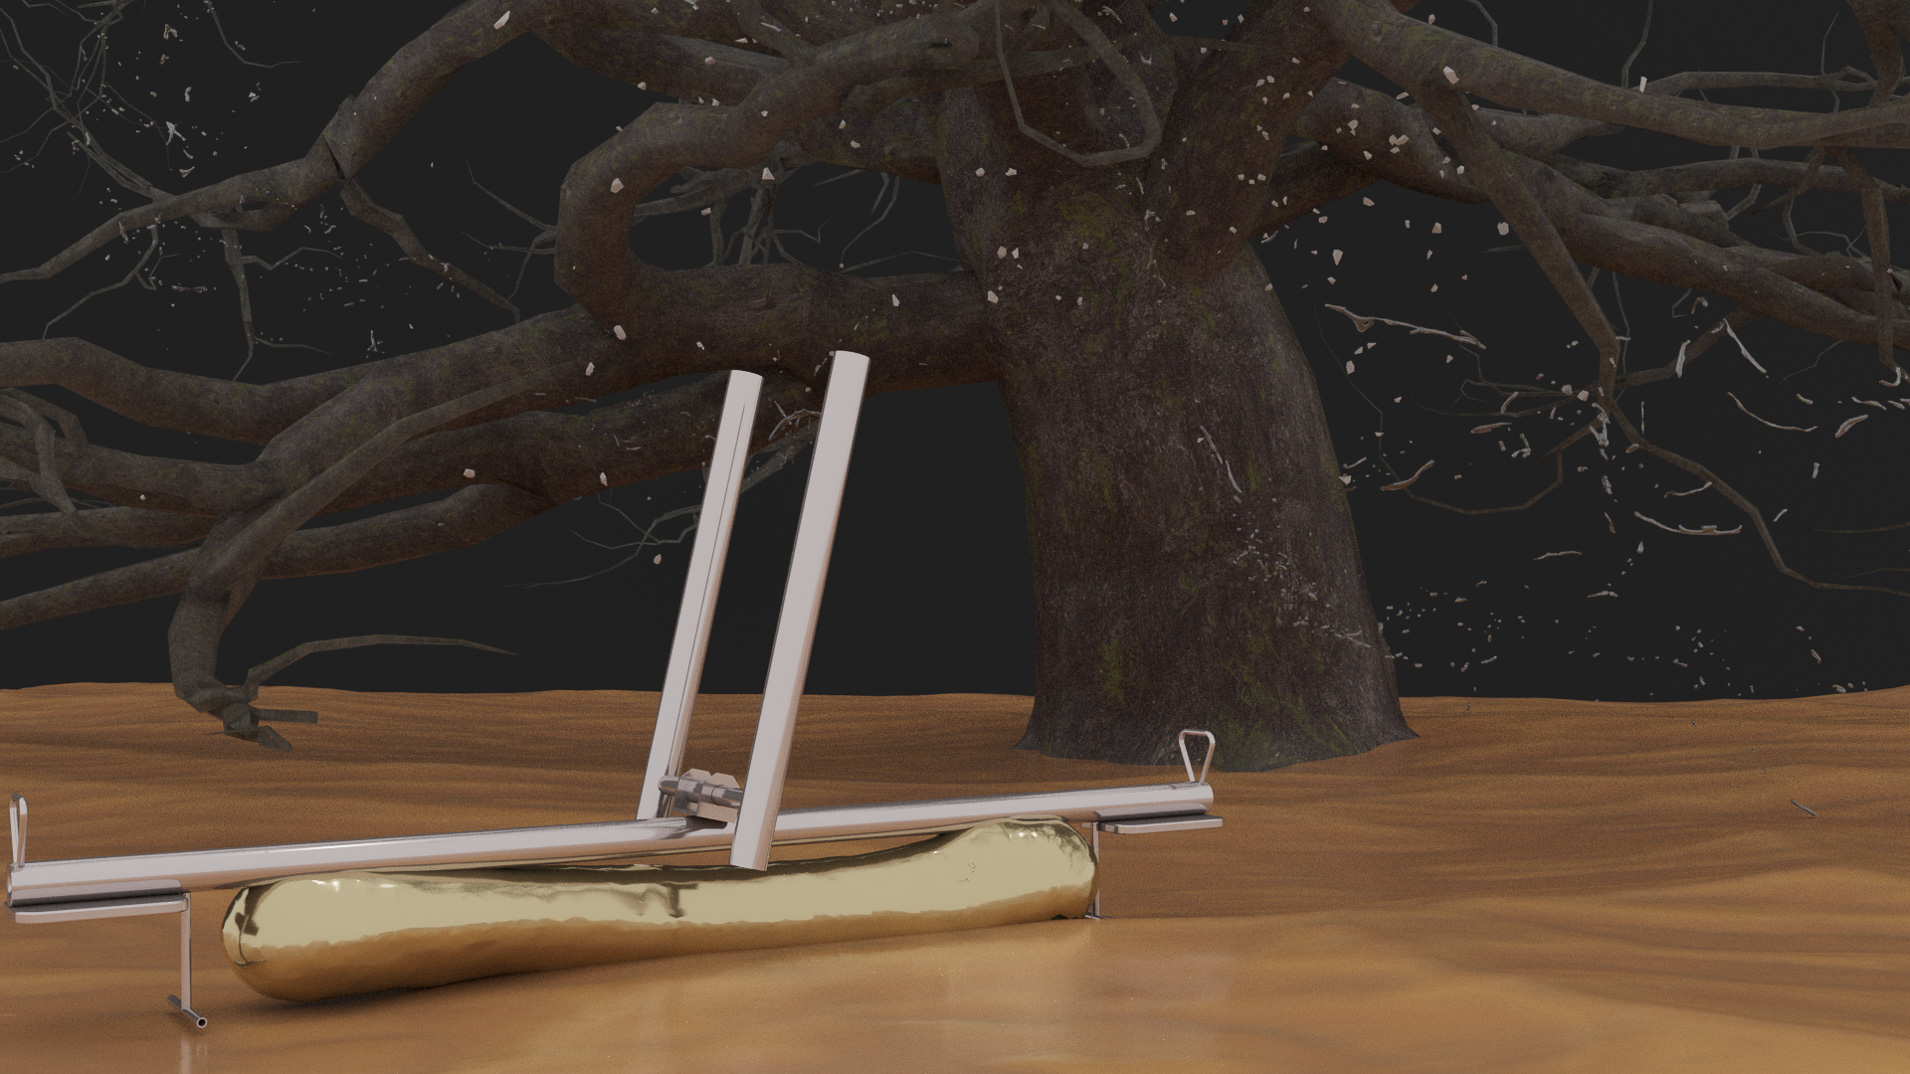 Still from a digital animation showing a tree and another object